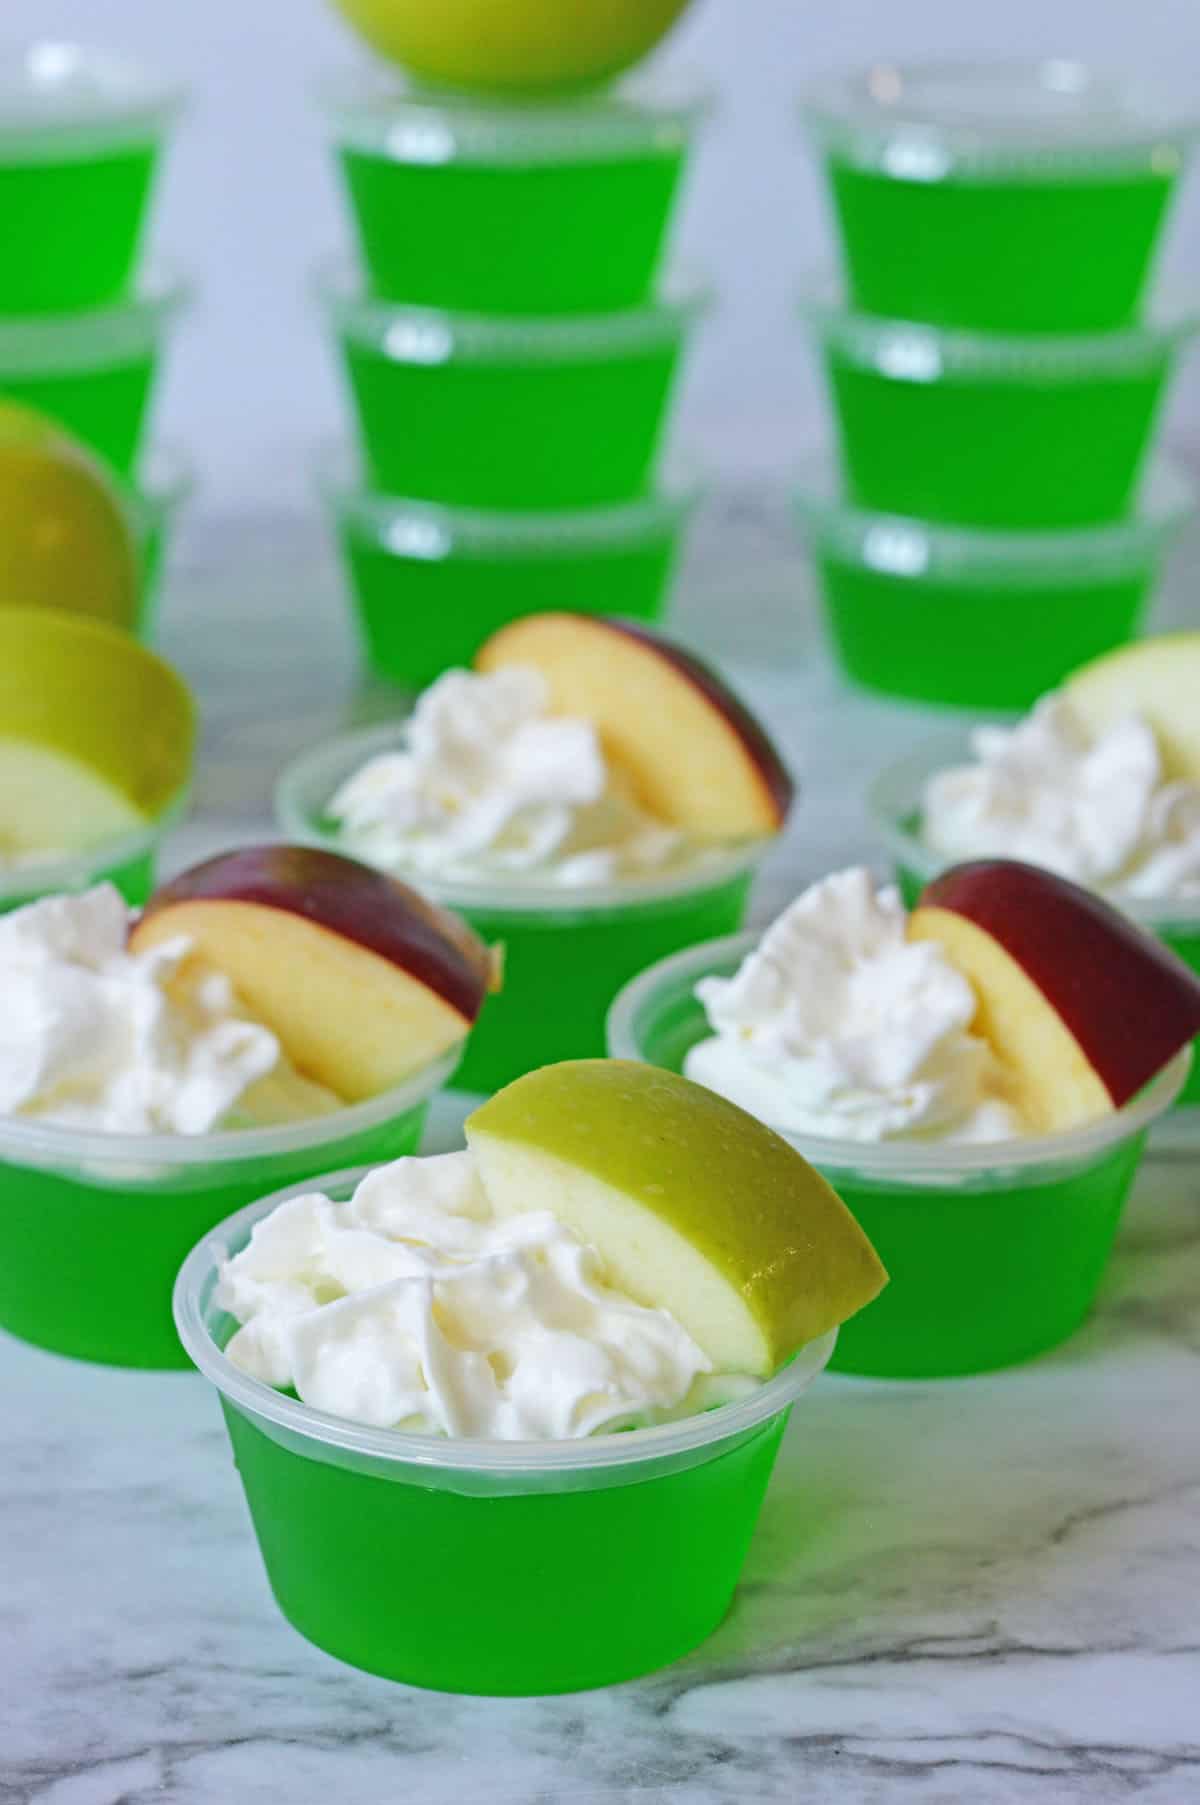 Apple jello shots with whipped cream and apple slice.